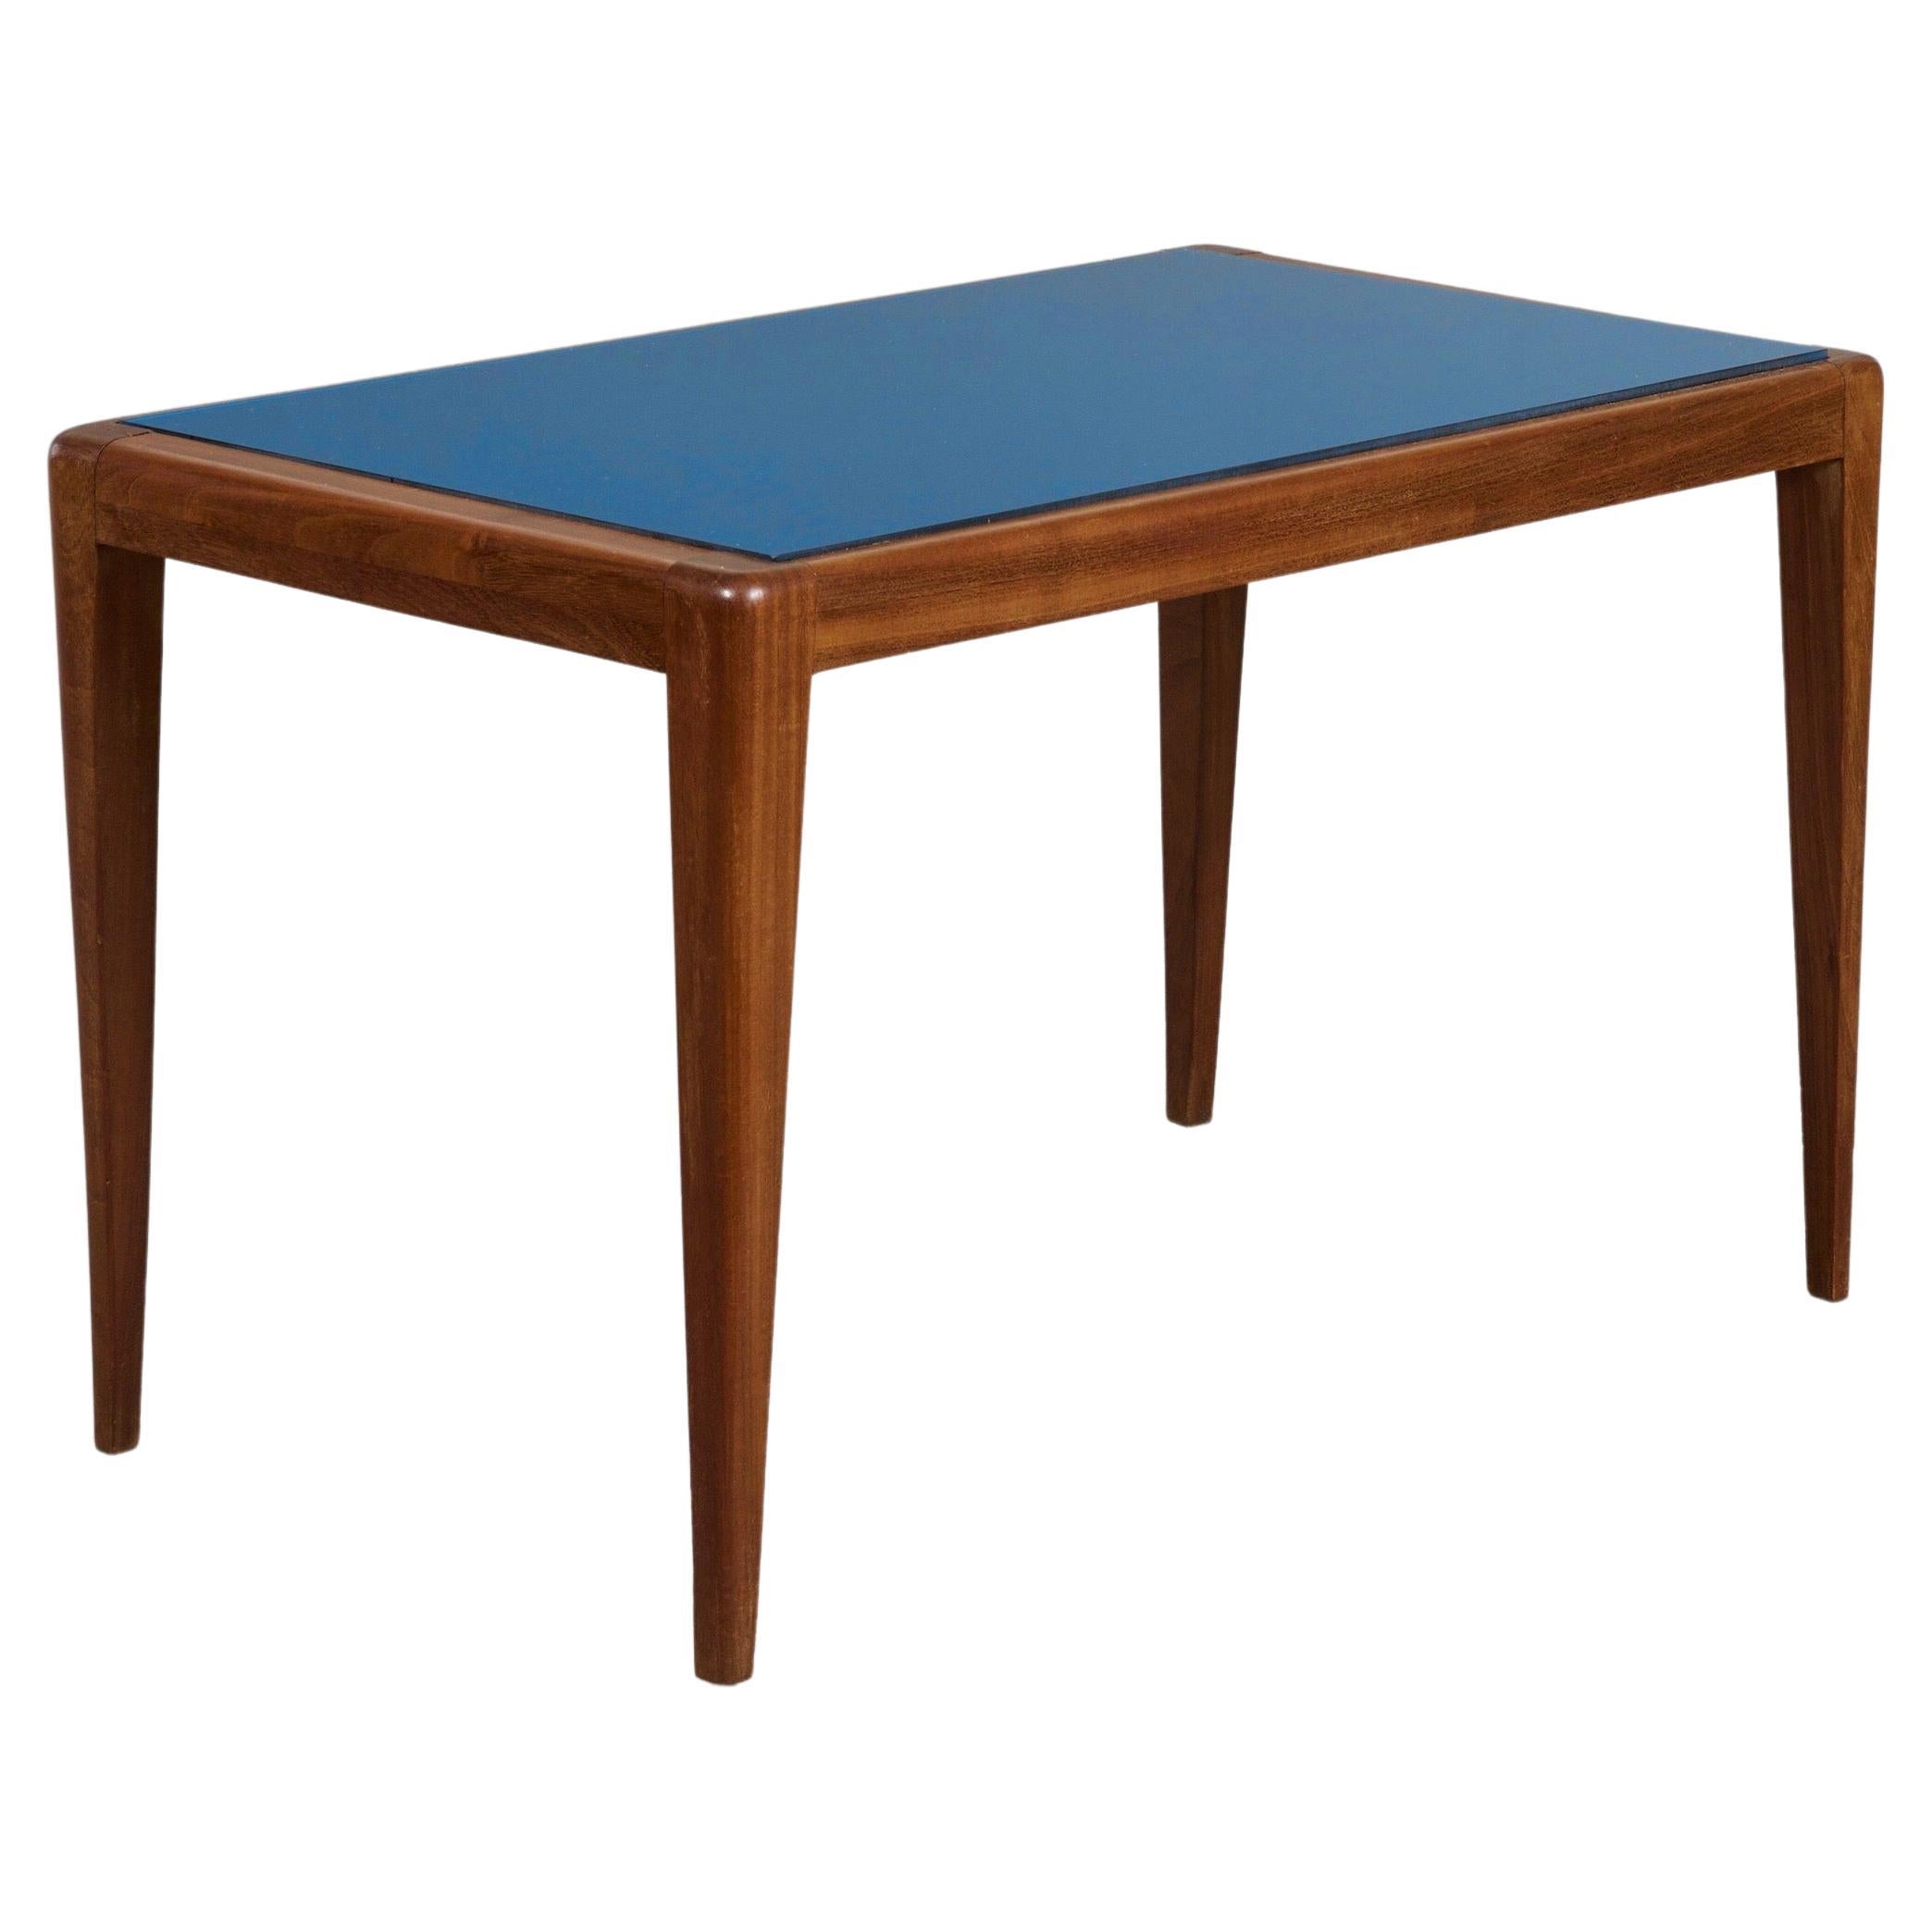 Italy, 1950's

An elegant rectangular side table in the style of Osvaldo Borsani, with a walnut frame cradling a vibrant cobalt blue mirrored glass top, raised on rounded and tapered legs.